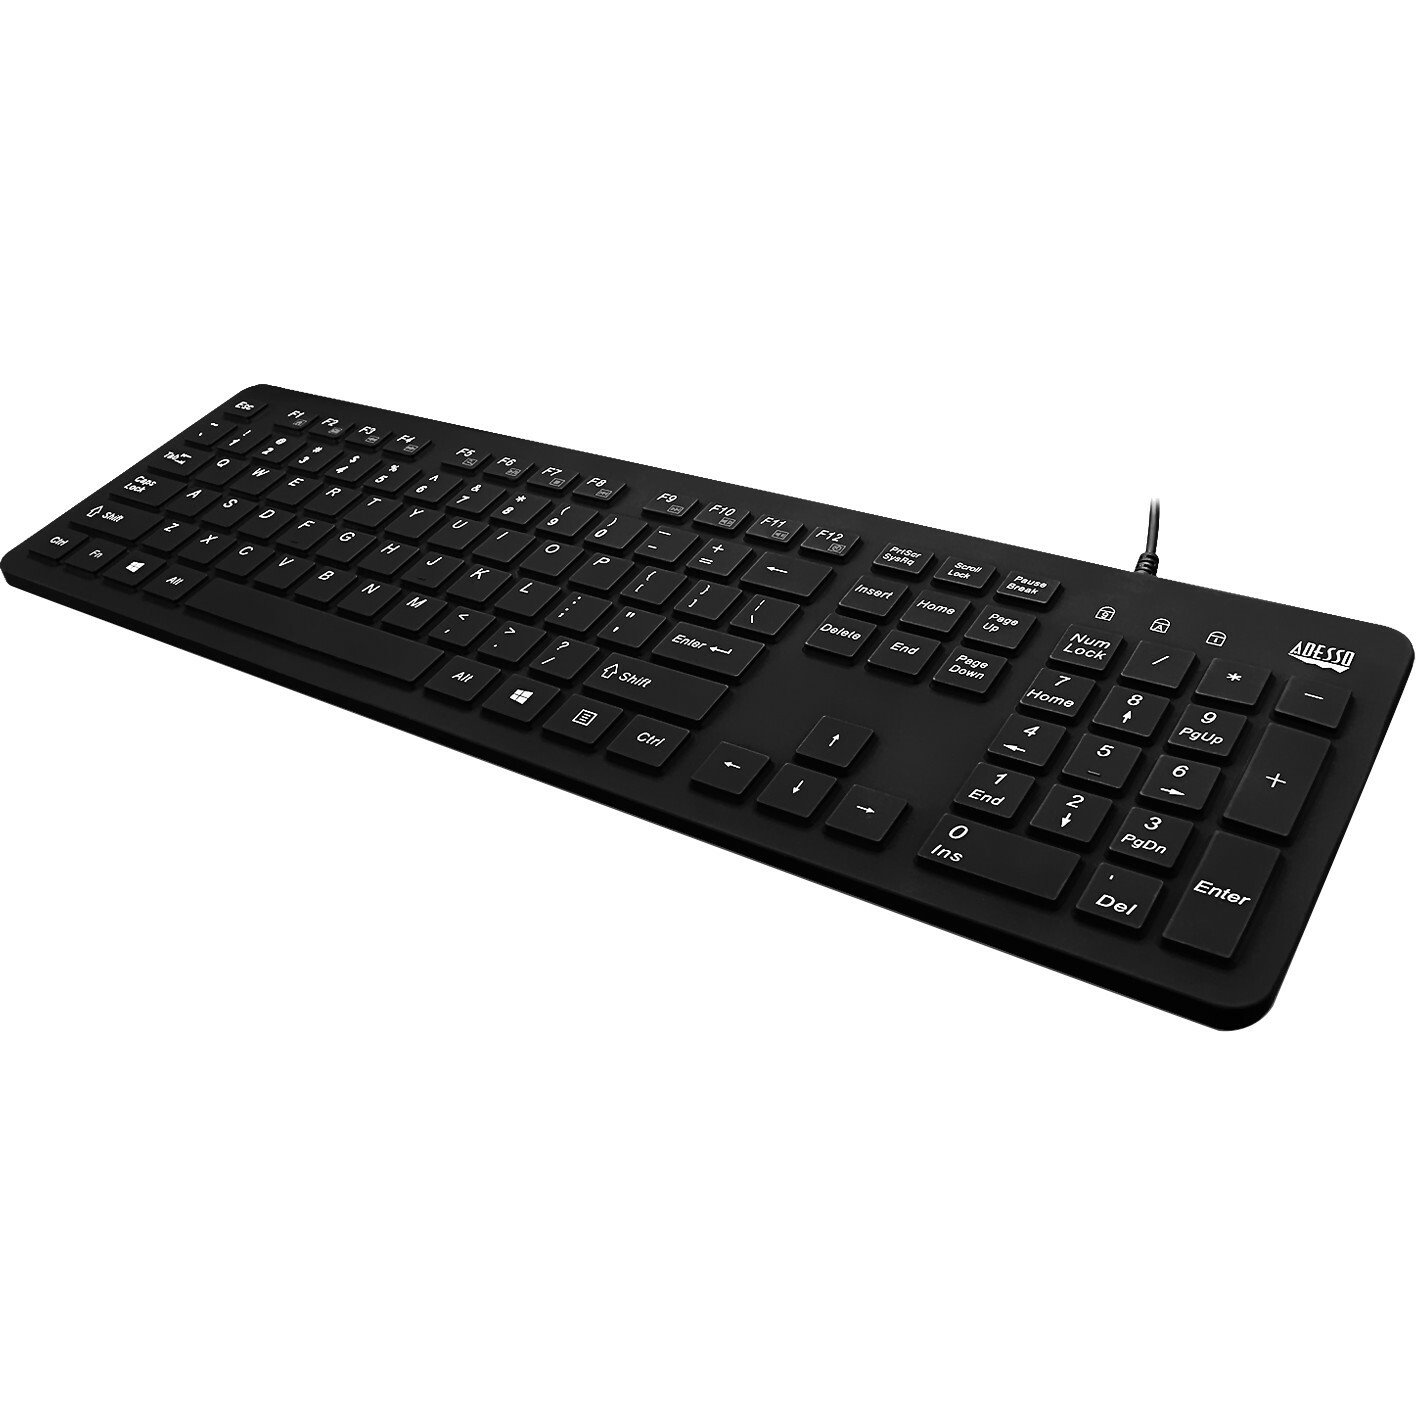 Adesso AKB-235UB Keyboard - Cable Connectivity - USB Interface - TouchPad - English (US) - Black